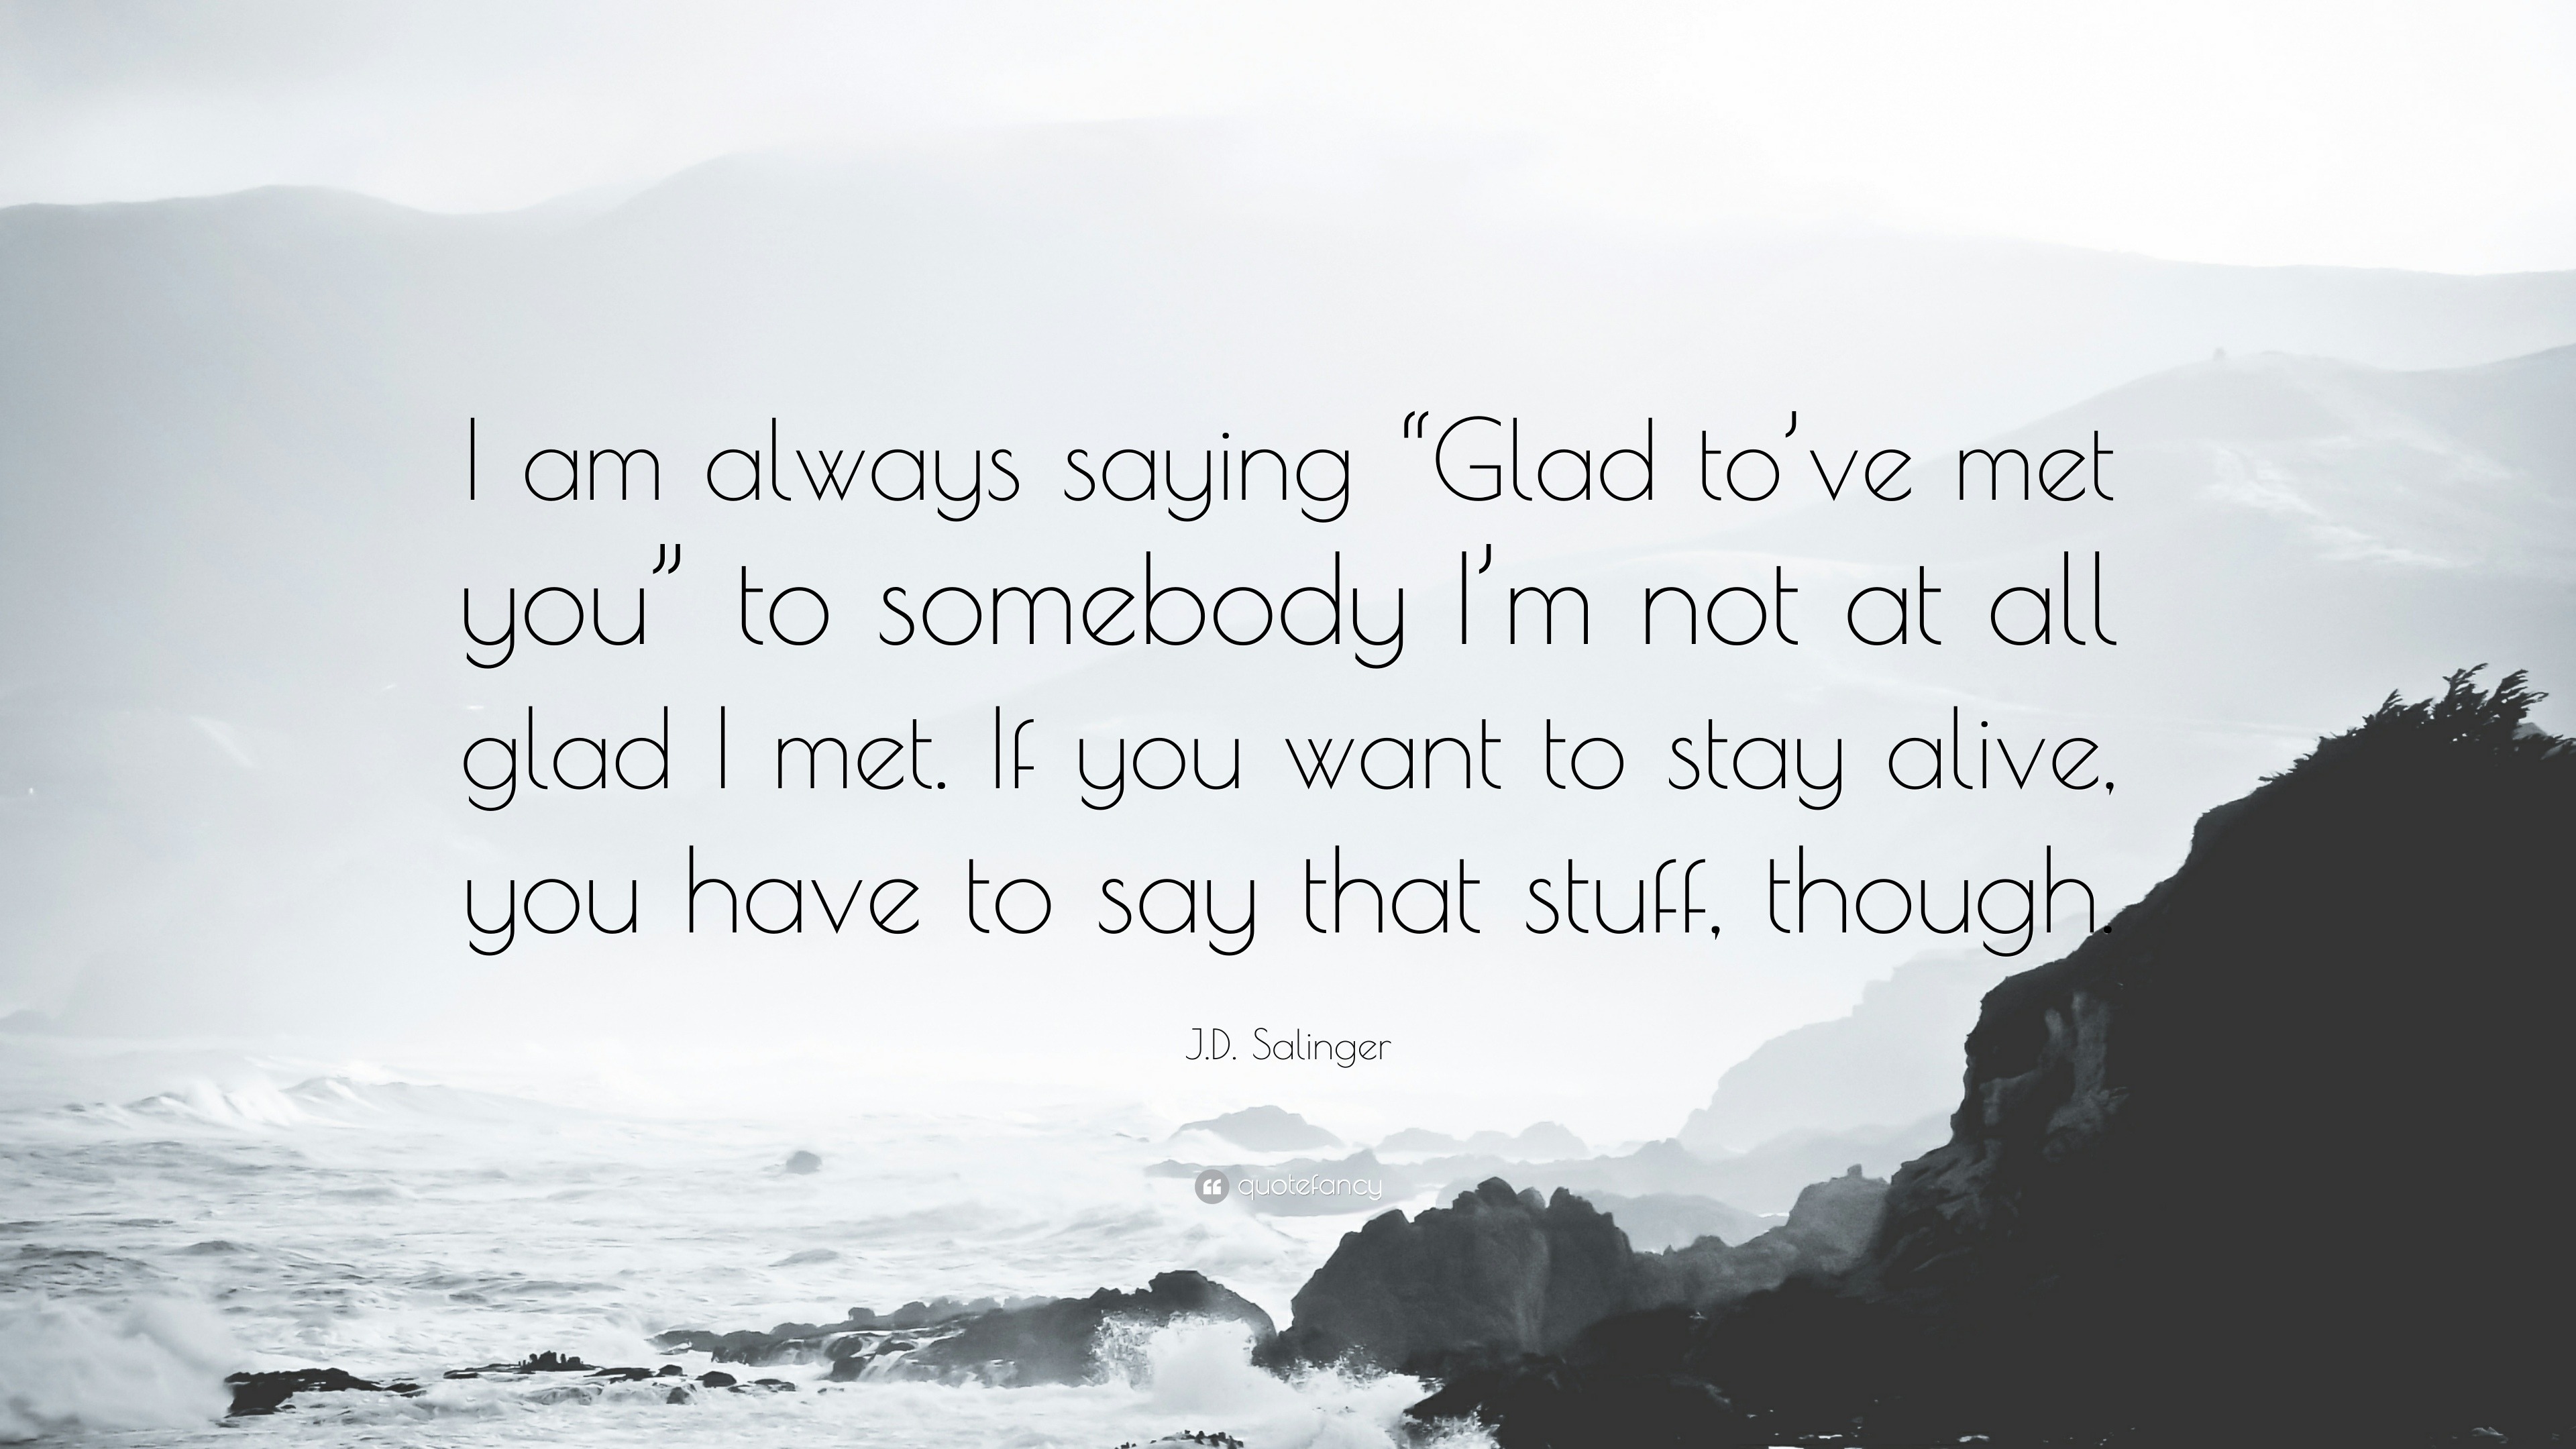 J.d. Salinger Quote: “I Am Always Saying “Glad To've Met You” To Somebody I'm Not At All Glad I Met. If You Want To Stay Alive, You Have To Sa...”